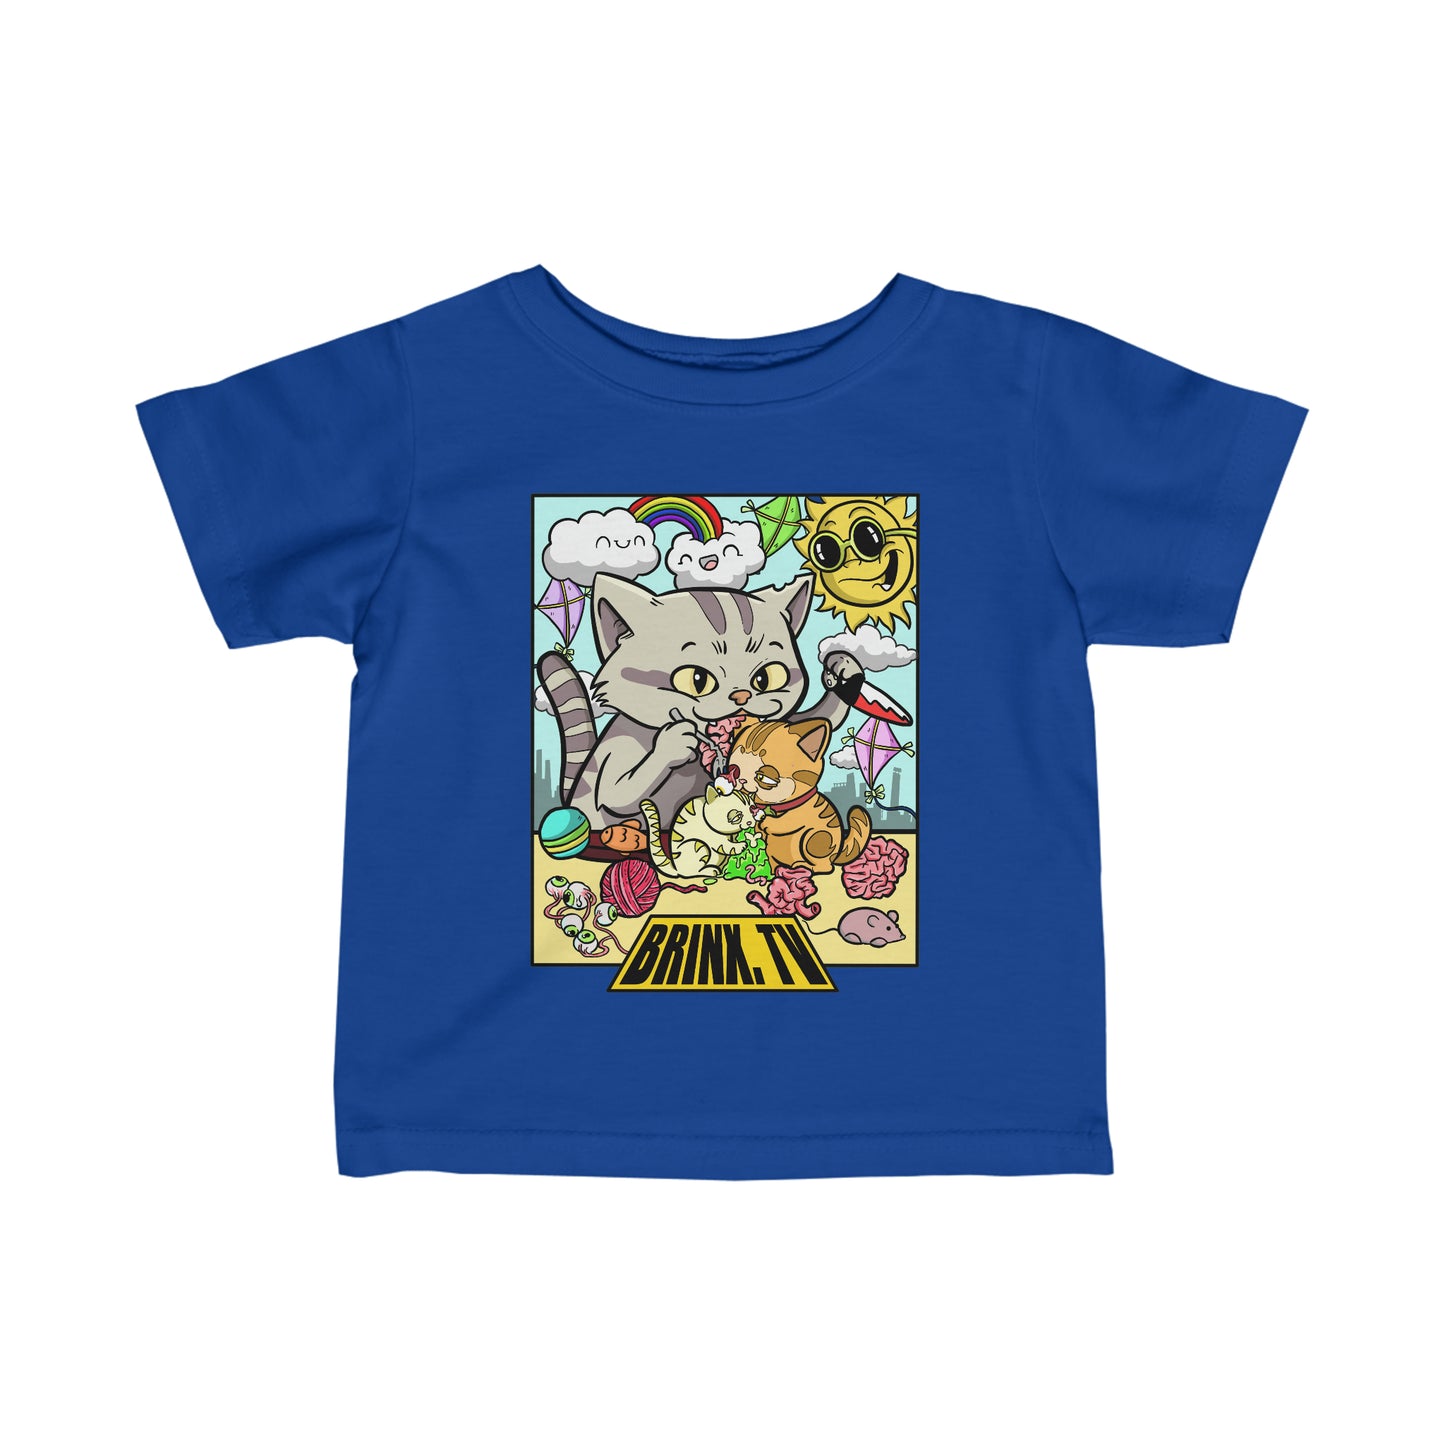 For Kids: Kittens, Kites, Cannibals Tee